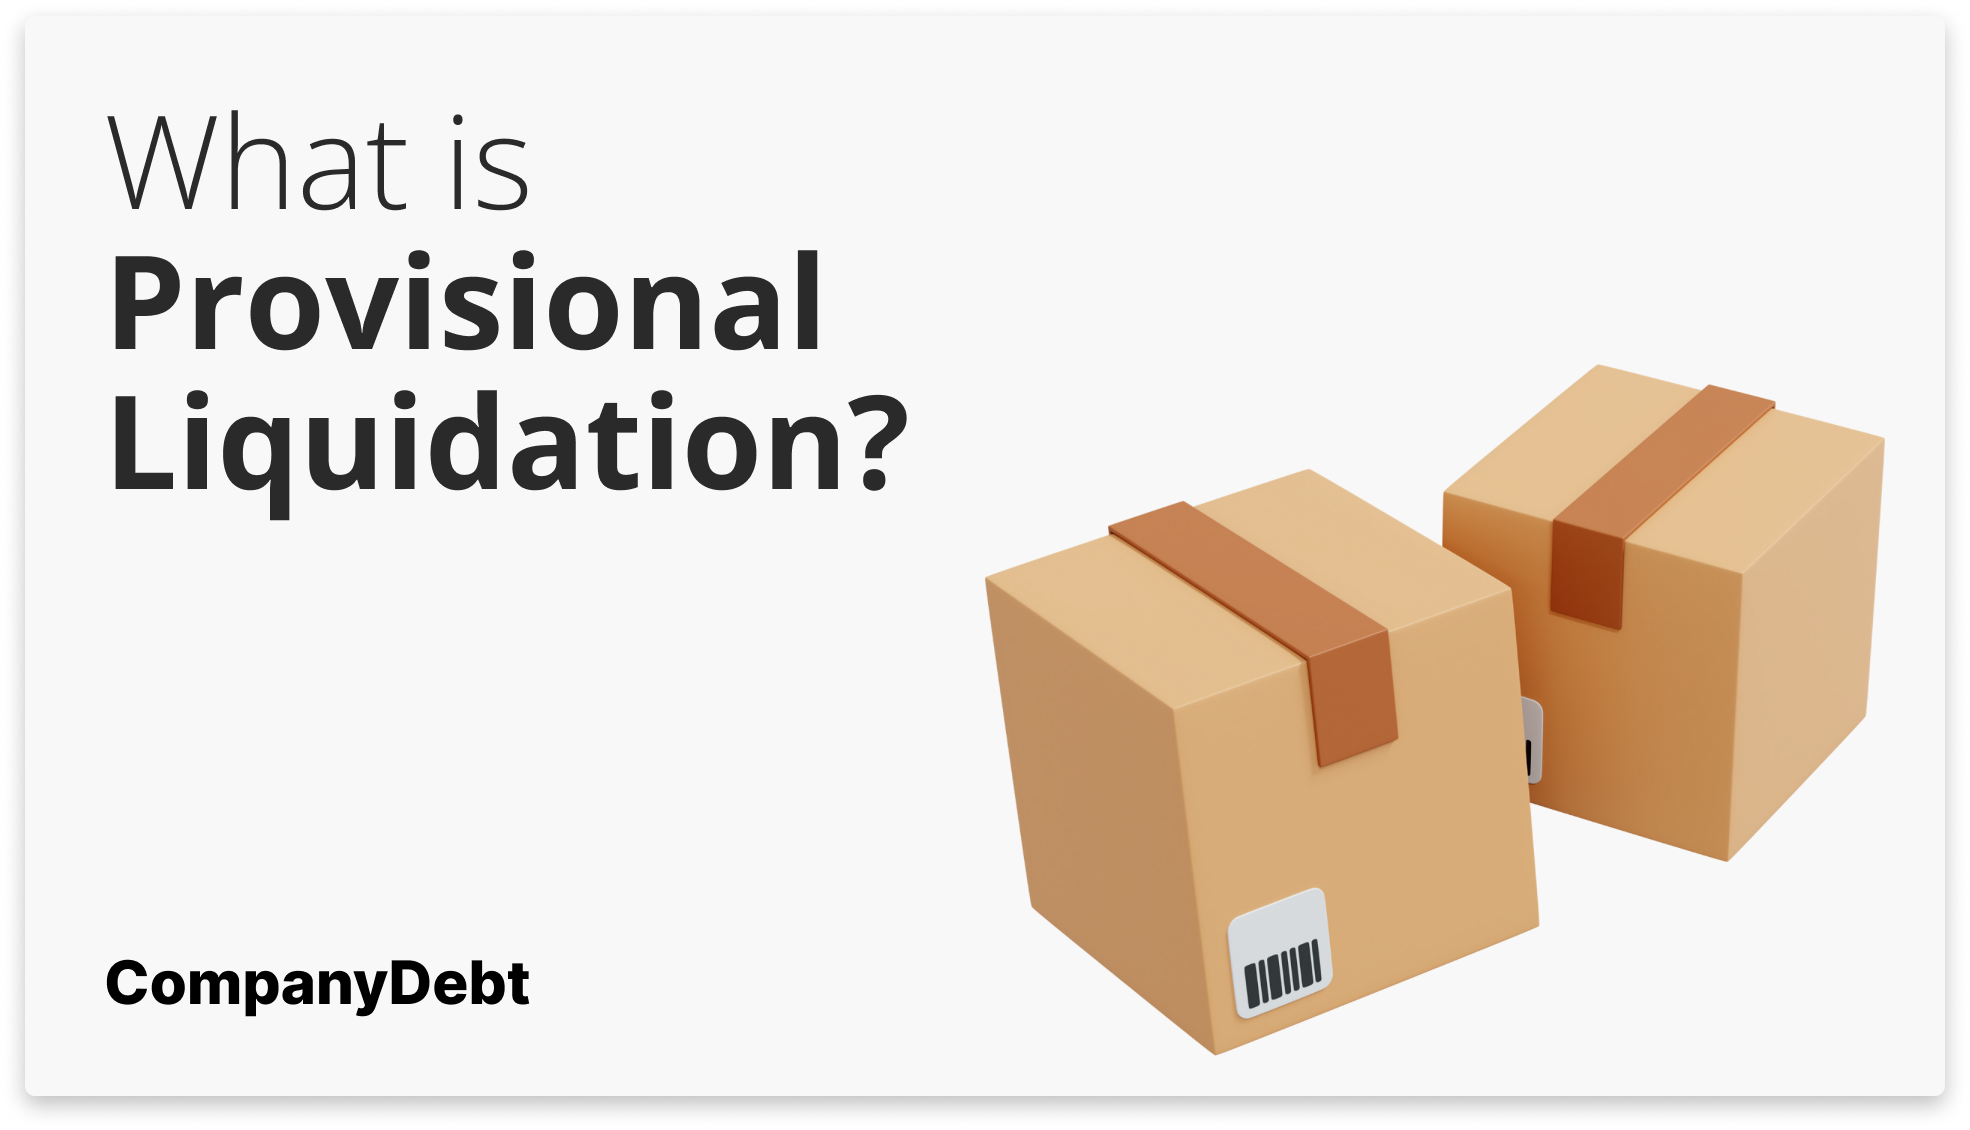 What is Provisional Liquidation?